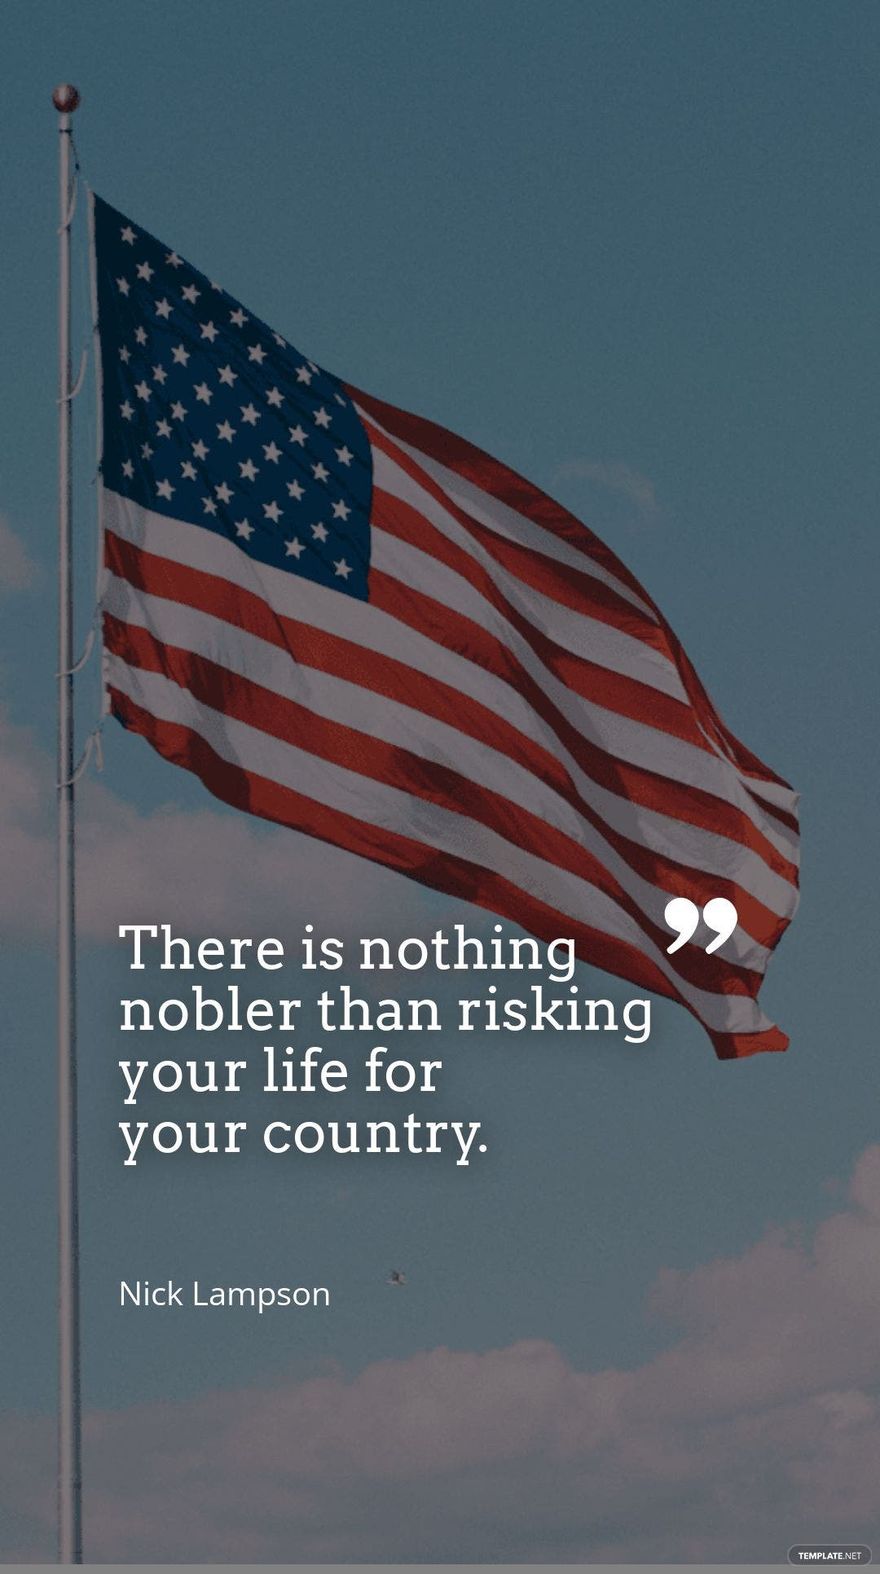 Free Nick Lampson - There is nothing nobler than risking your life for your country. in JPG